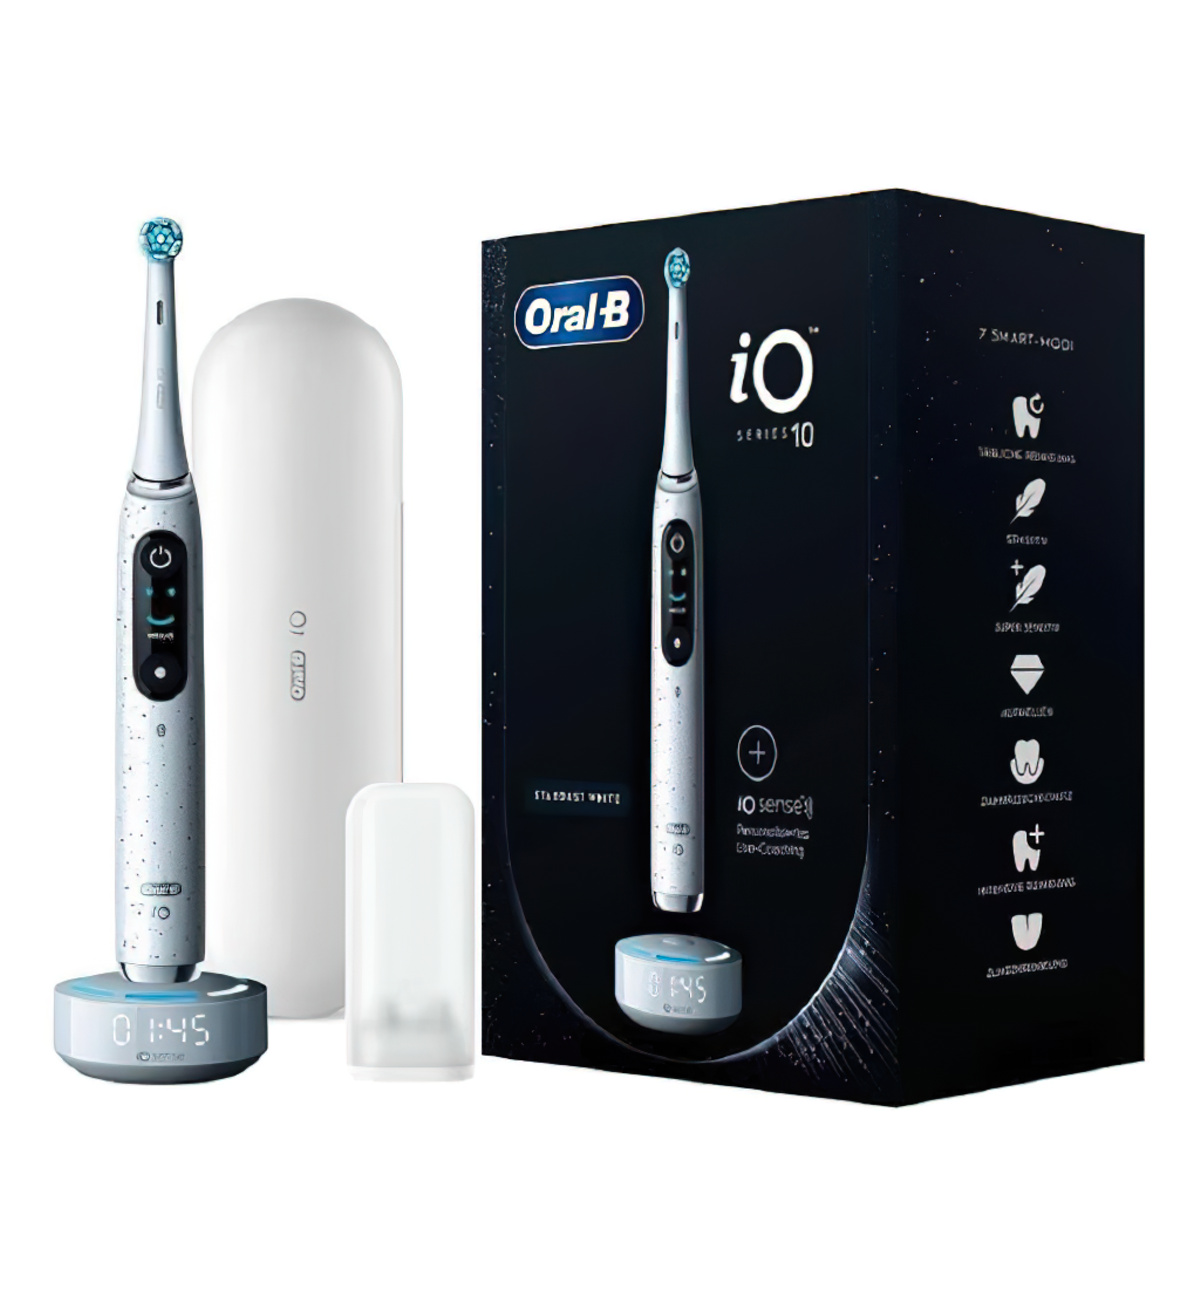 Oral-B Genius X - Best Electric Toothbrush 2023 - Willow Pass Dental Care, Concord, CA